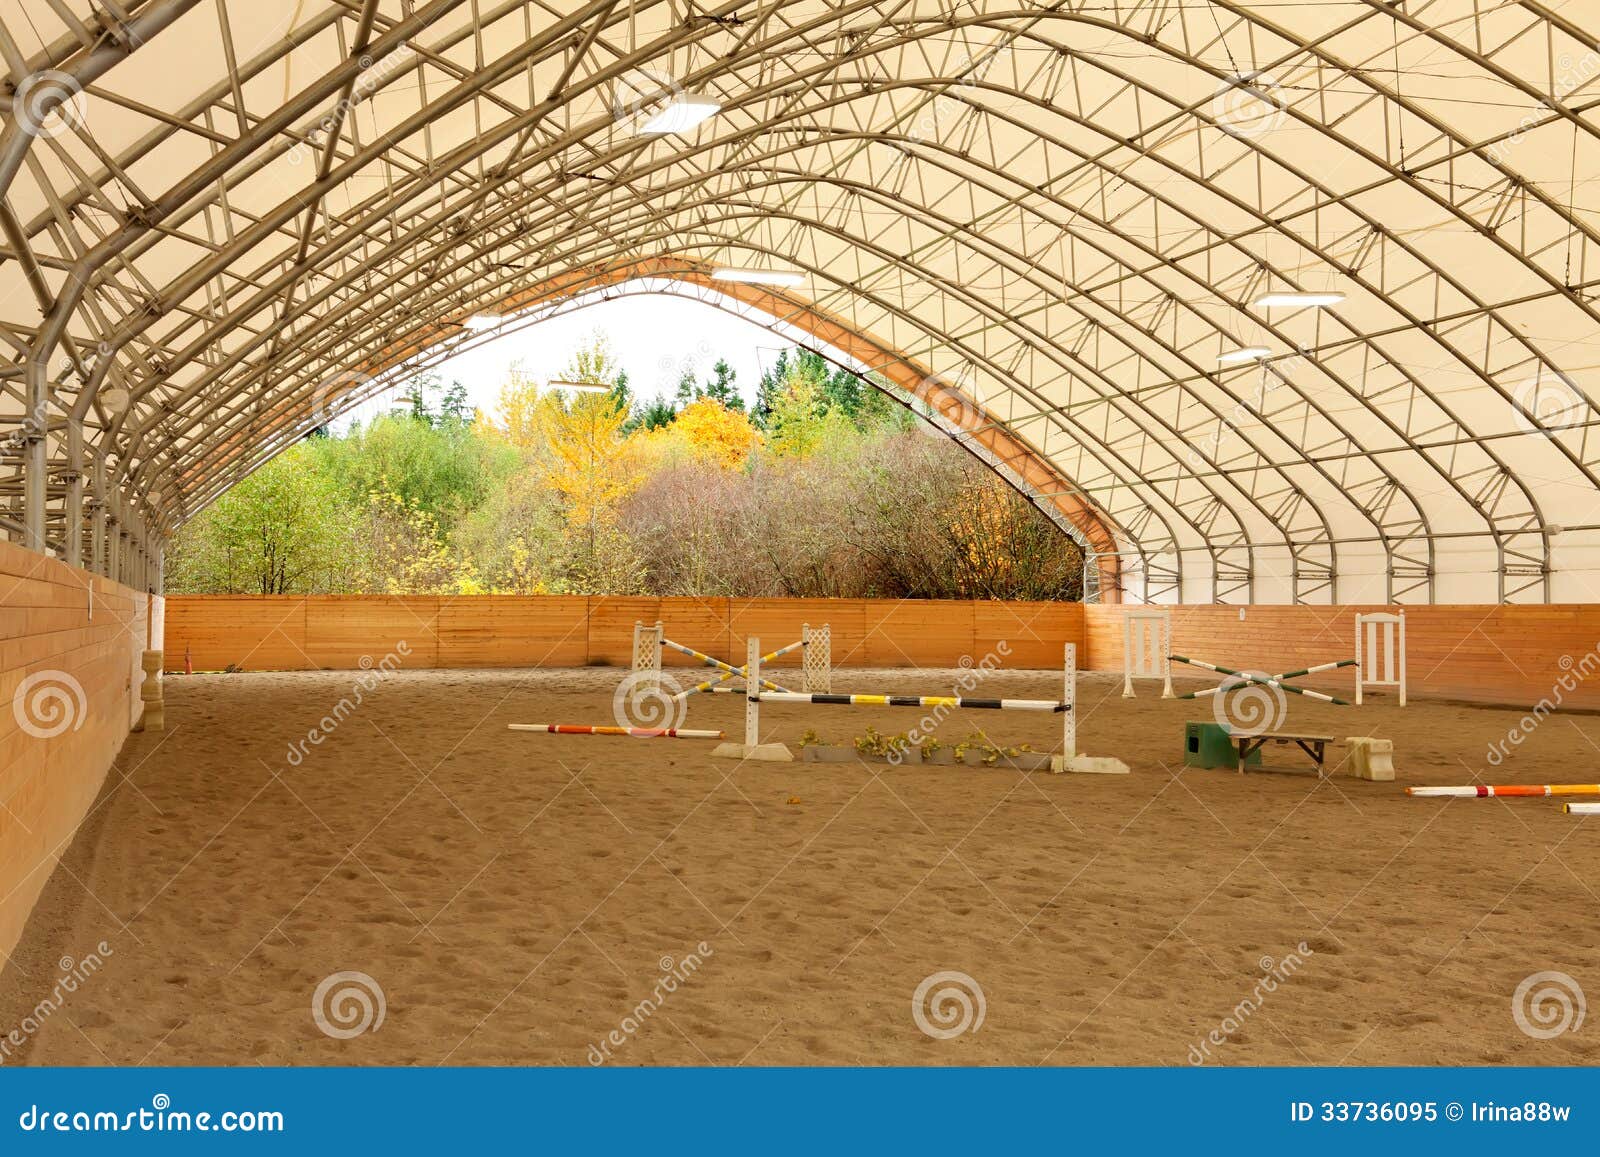 covered open horse arena with sand.